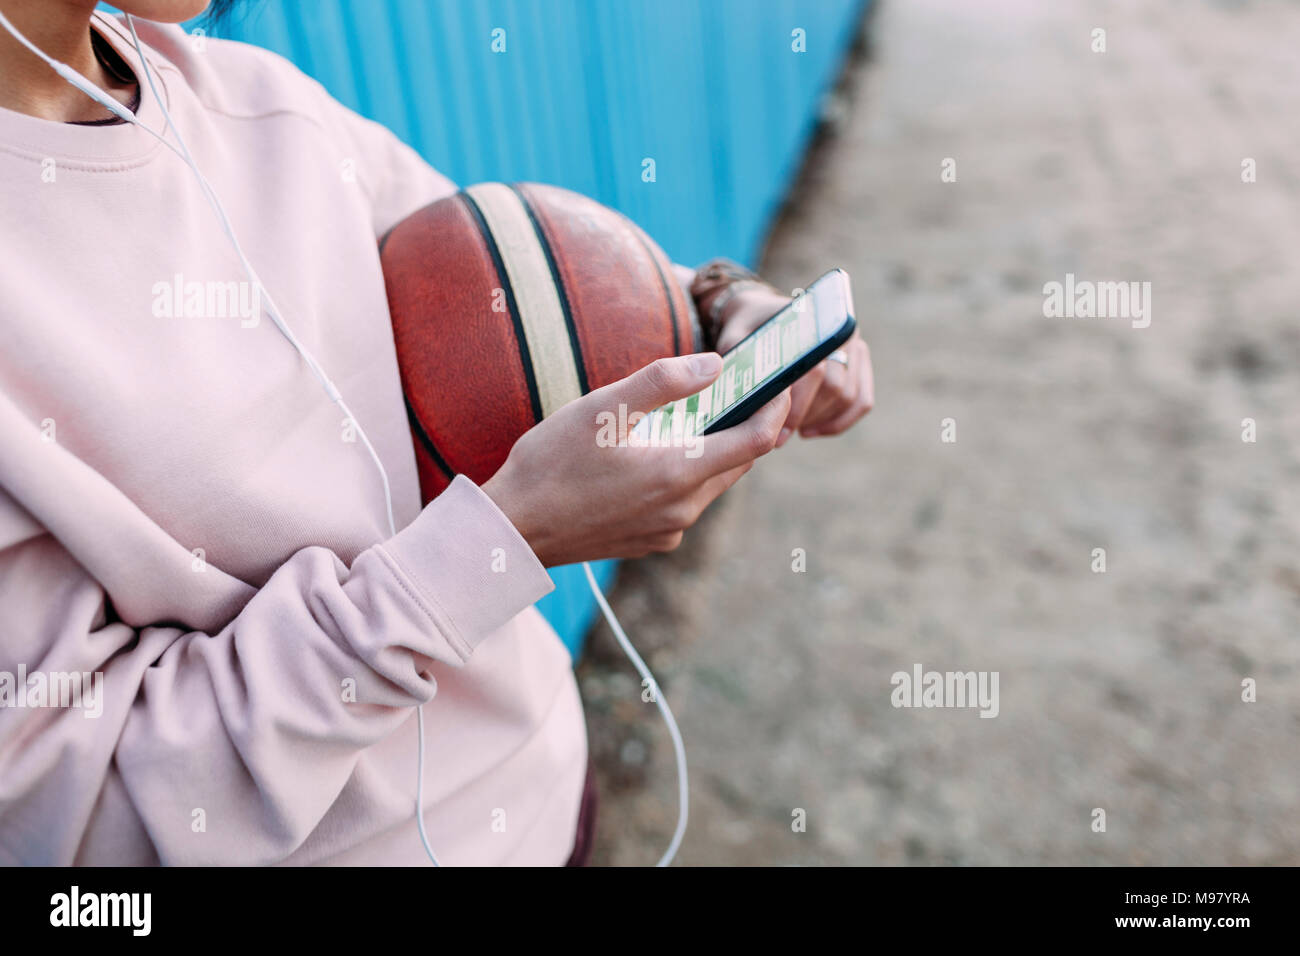 Close-up of woman with basketball, smartphone and earphones Stock Photo